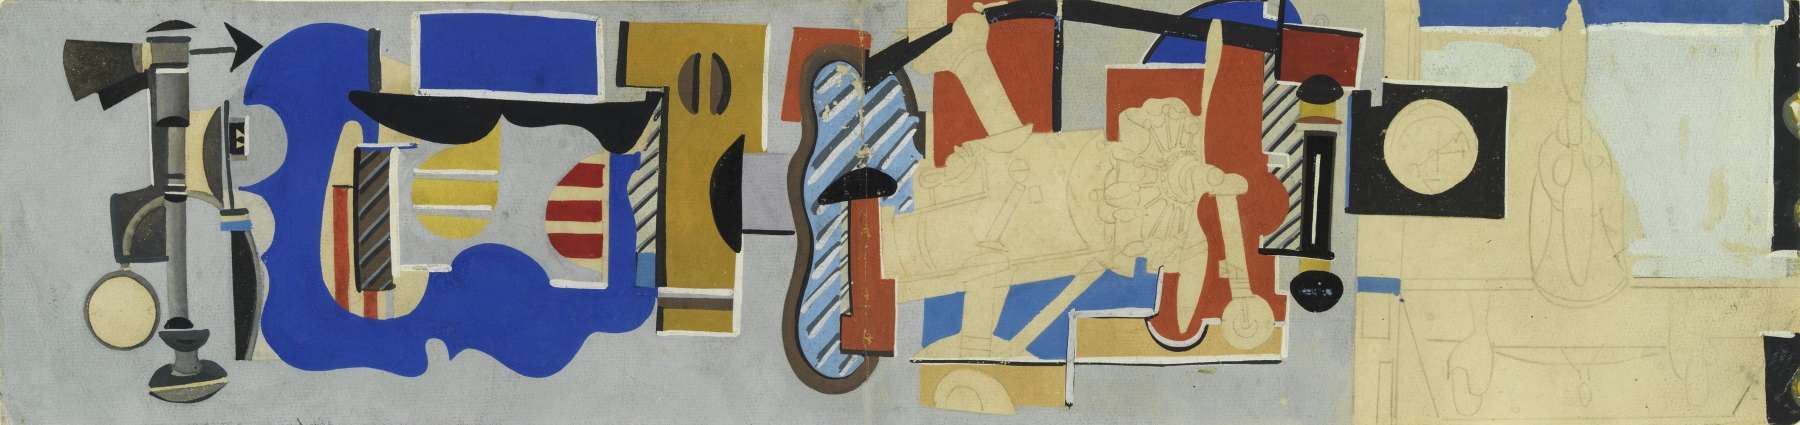 Drawing for&nbsp;Man&#039;s Conquest of the Air, Aviation Building, 1939 New York World&#039;s Fair, c. 1938&ndash;39, gouache and graphite pencil on paper, 5 7/8 x 23 7/8 in. (14.9 x 60.6 cm). Private collection. [AGCR: D0636]